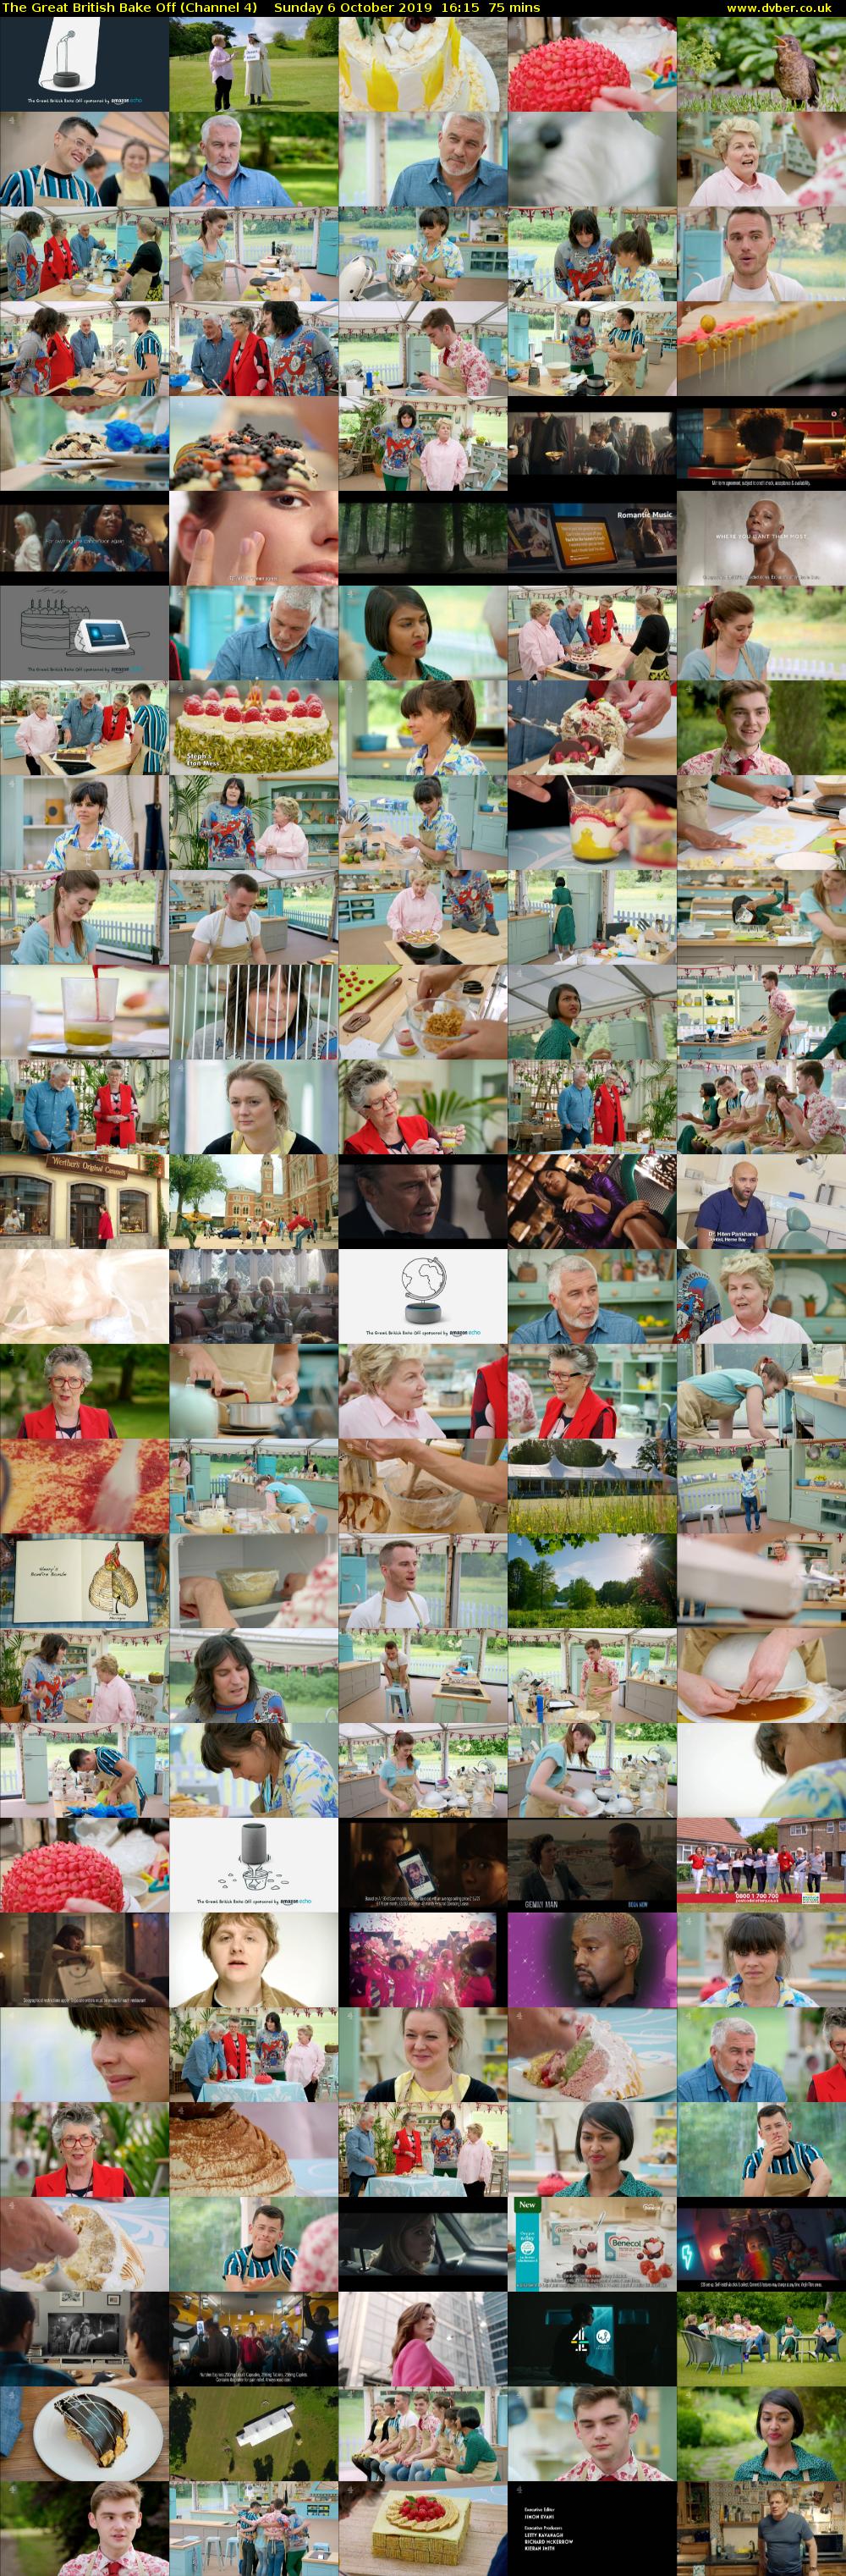 The Great British Bake Off (Channel 4) Sunday 6 October 2019 16:15 - 17:30